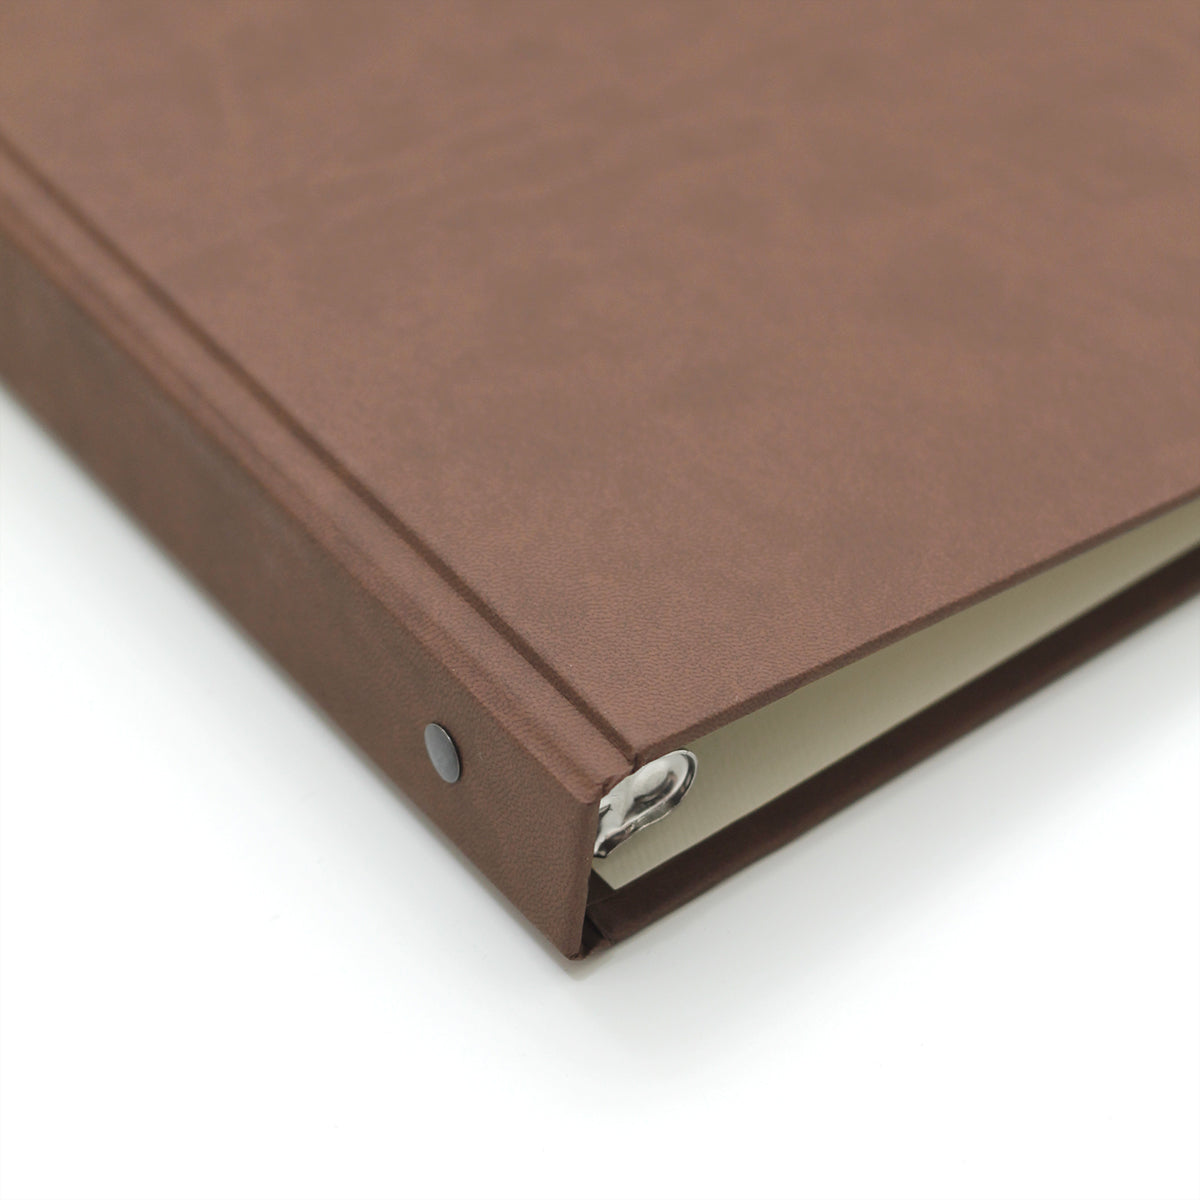 Photo Binder (for 5x7 photos) with Mocha Animal Friendly Faux Leather